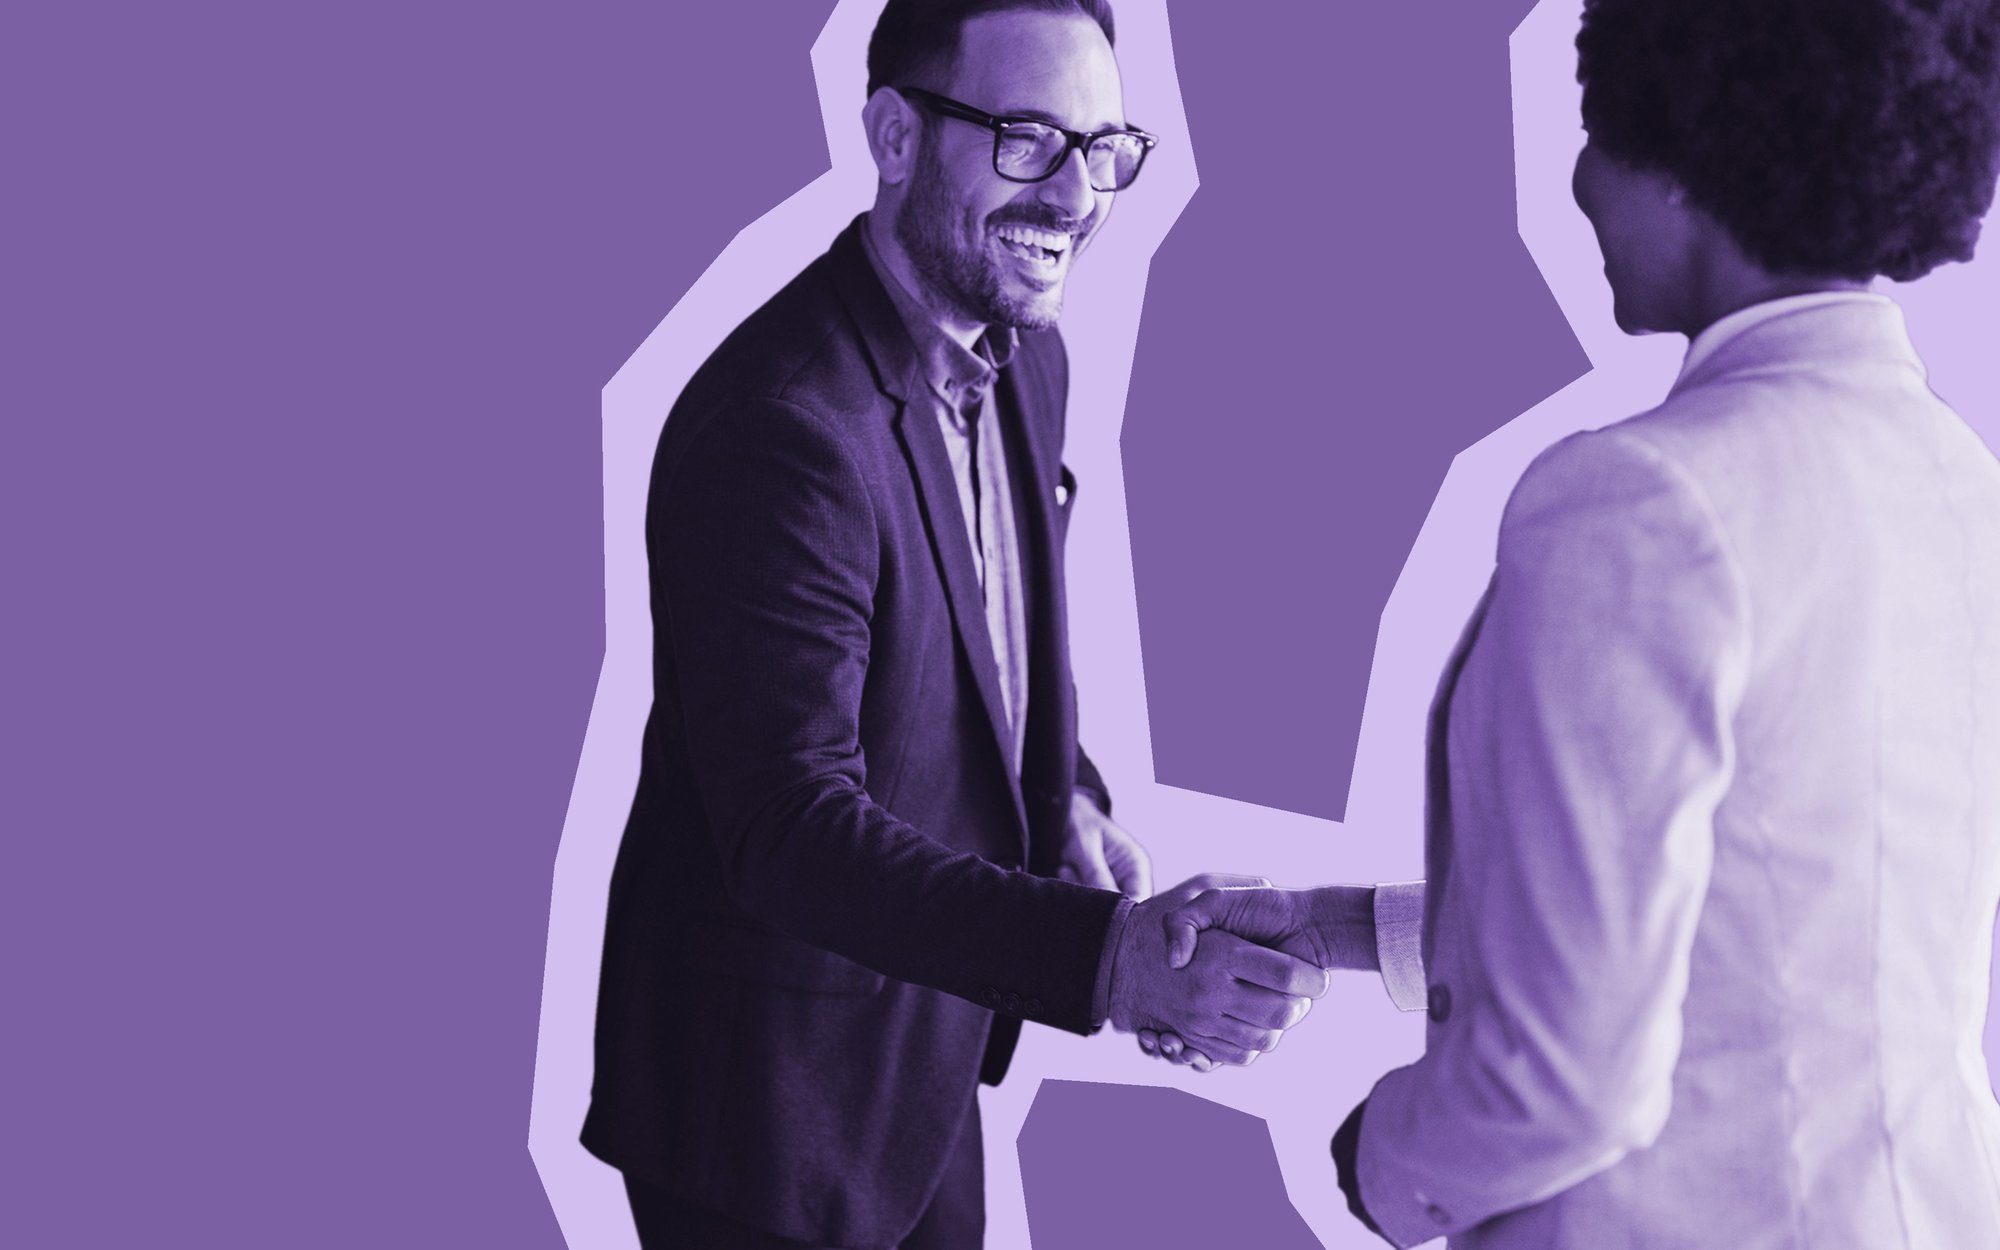 Black and white photo cut-out of a man and a woman shaking hands against a purple background